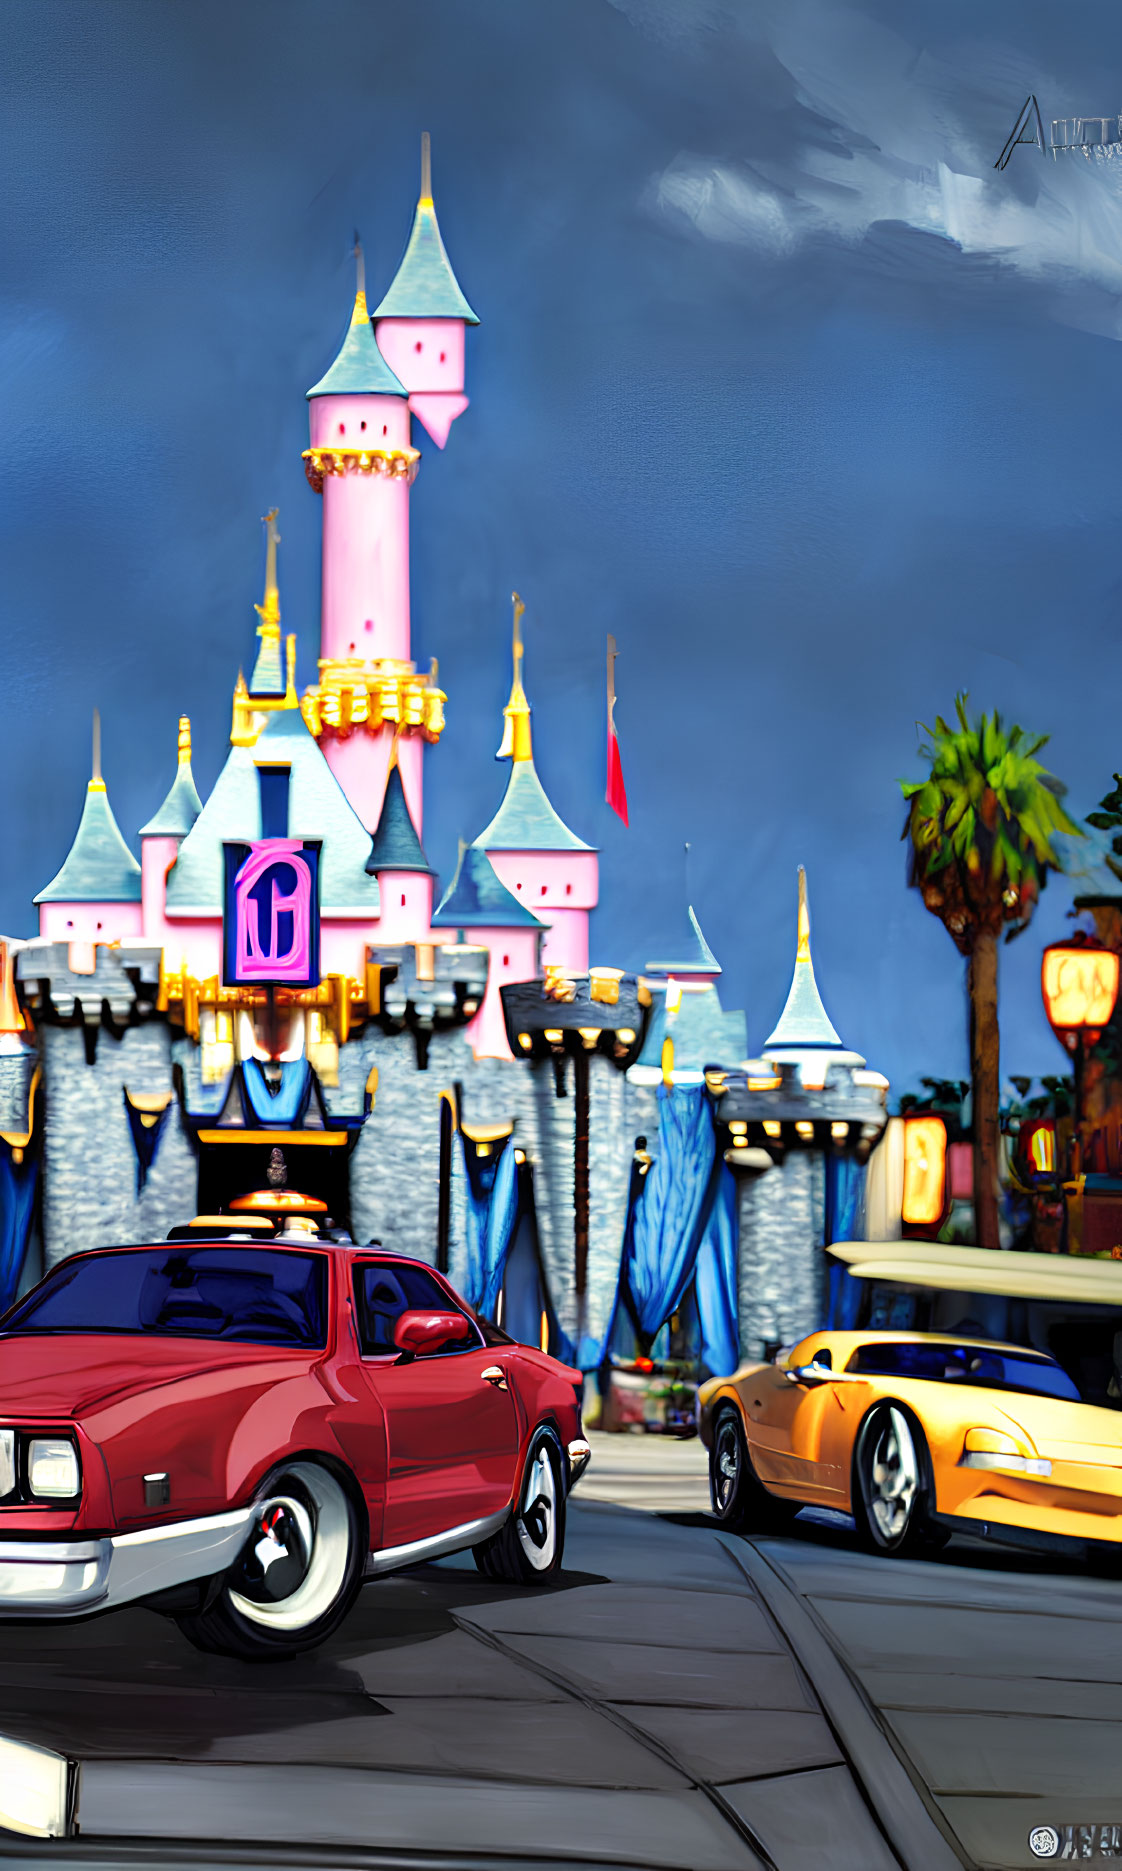 Illustration of red and yellow sports cars with fantasy castle on street